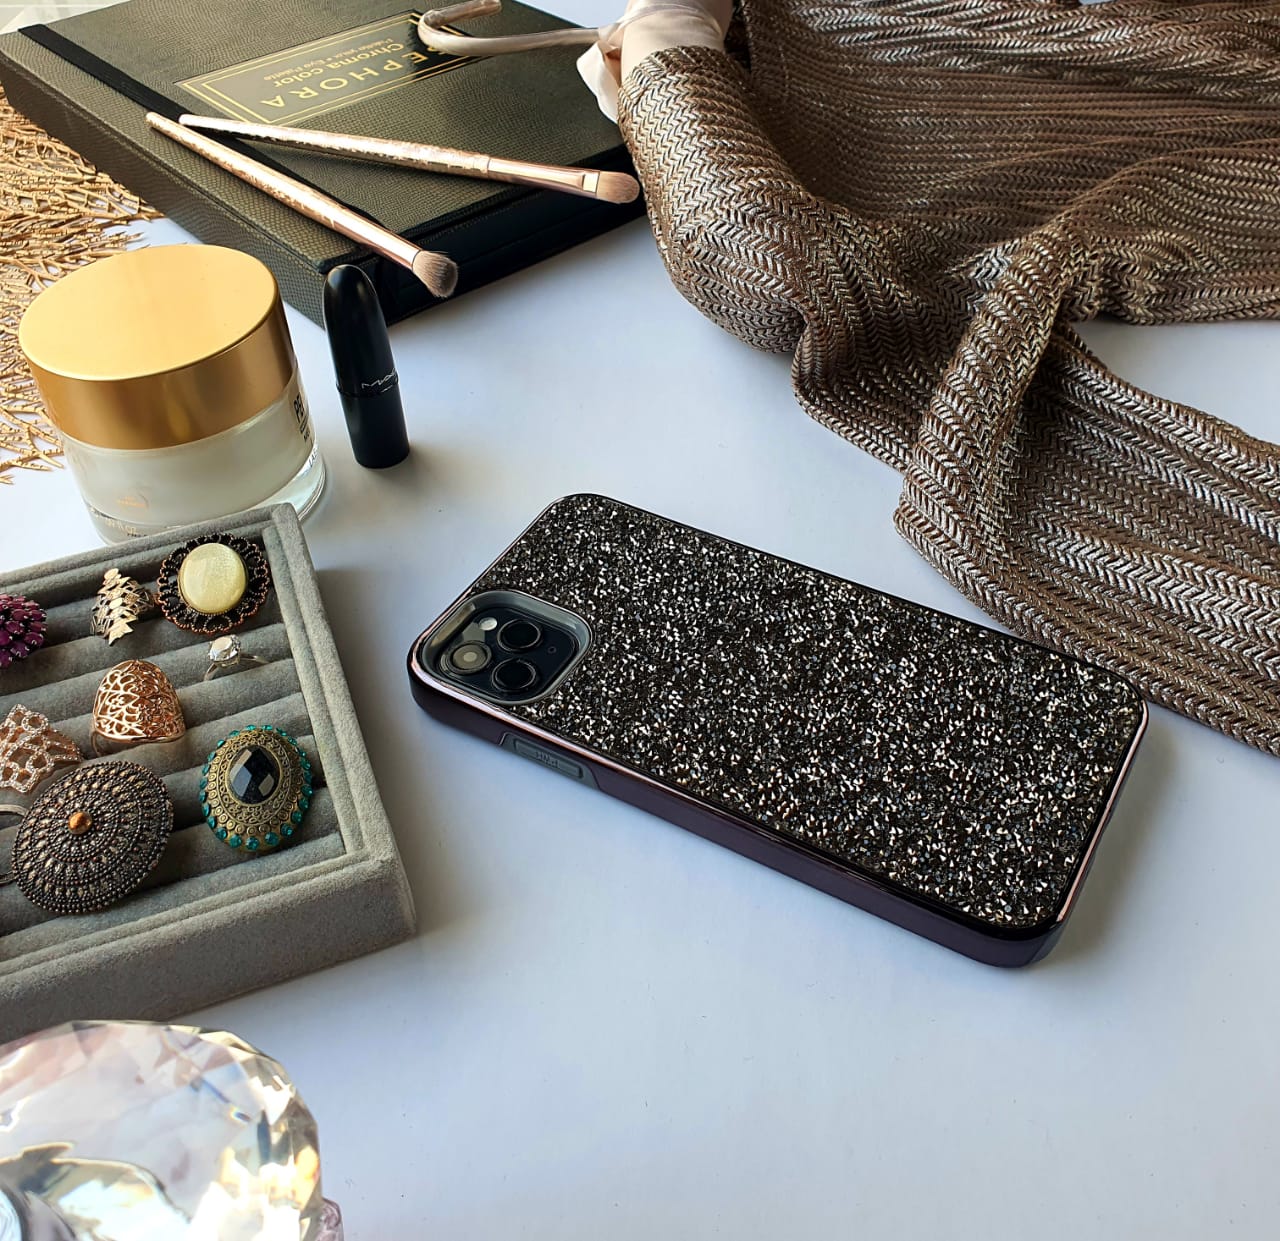 Crystal Studded Black Silicon iPhone Case